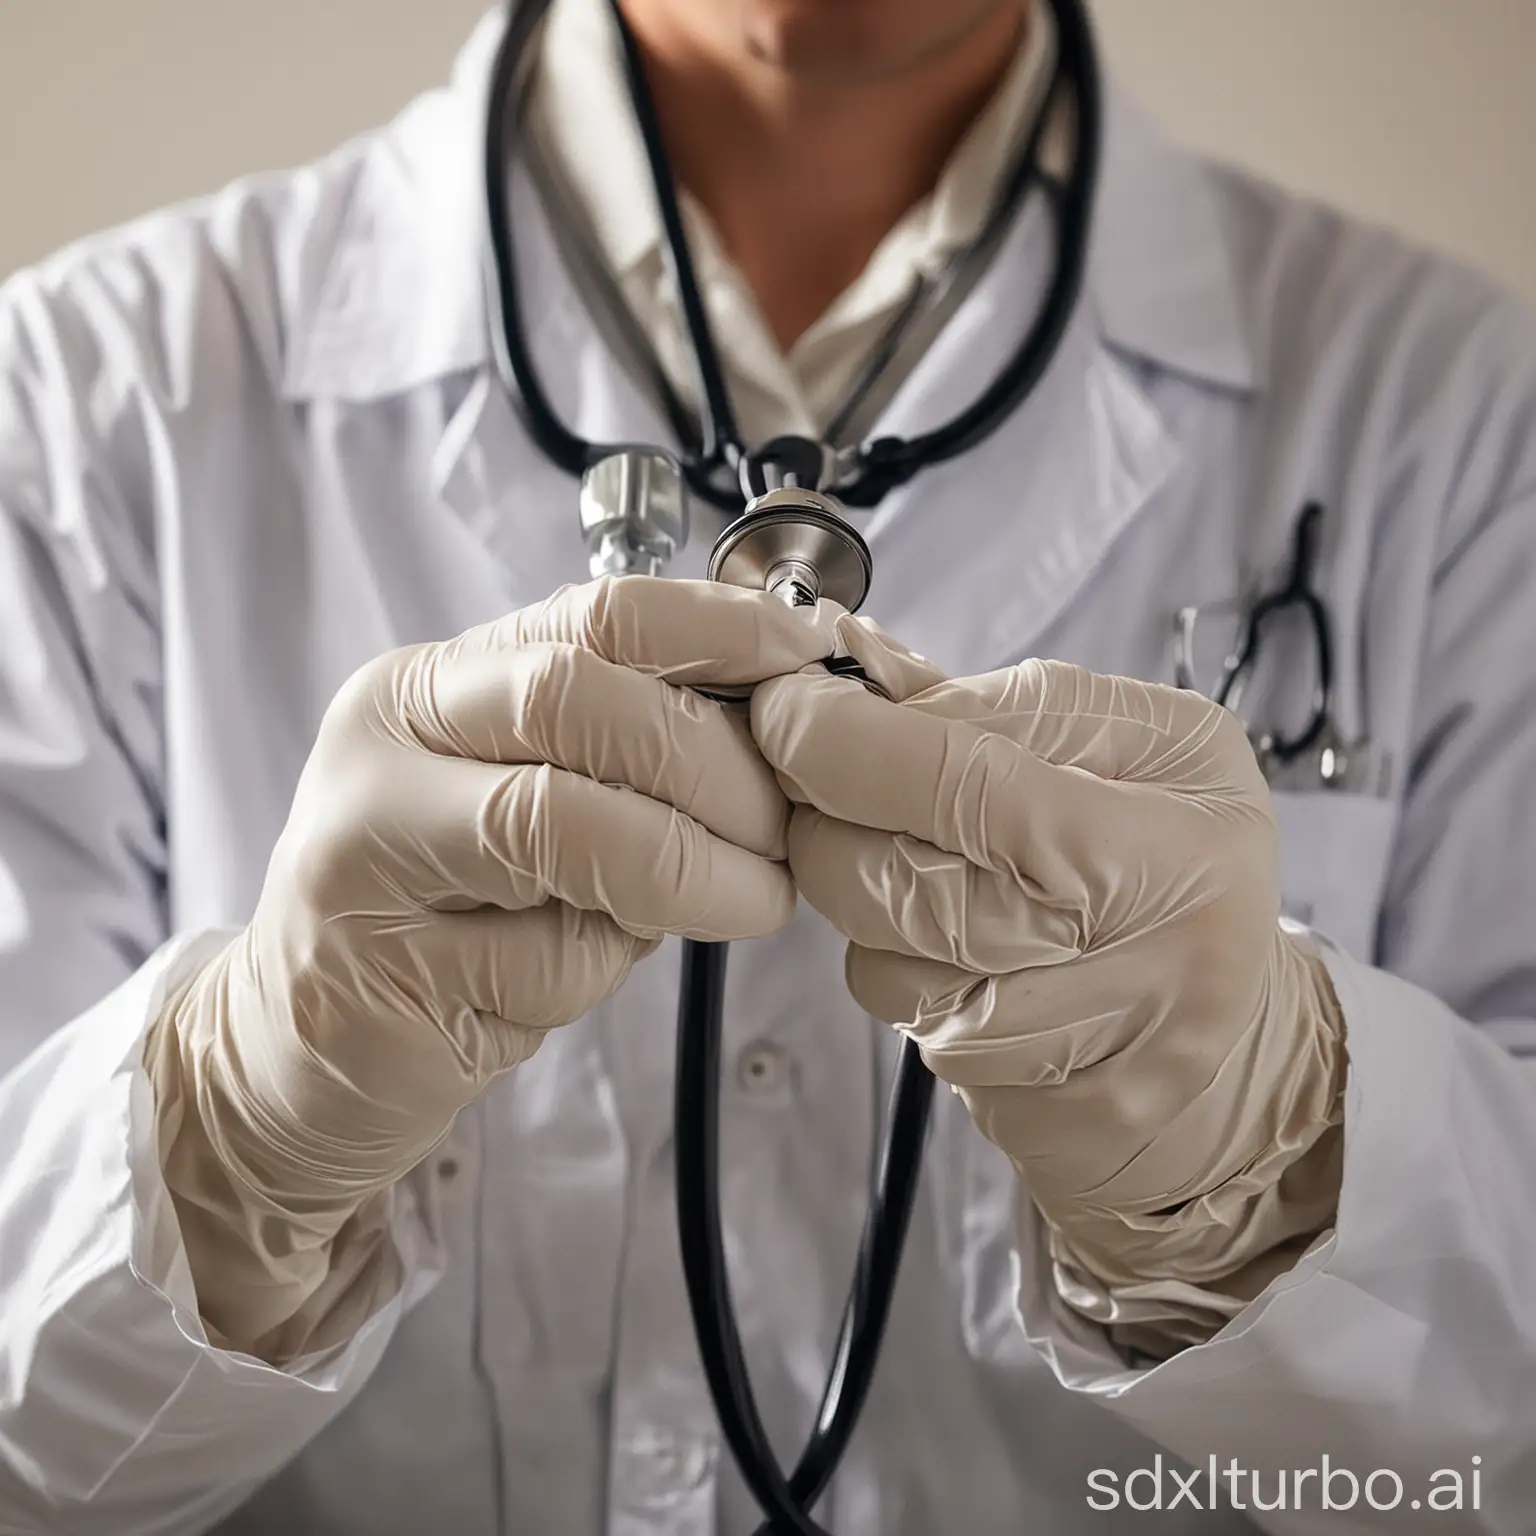 A close-up of a person's hands holding a stethoscope. The hands are wearing white gloves, and the stethoscope is wrapped around the neck. The background is blurred, and the only visible light is coming from the stethoscope.